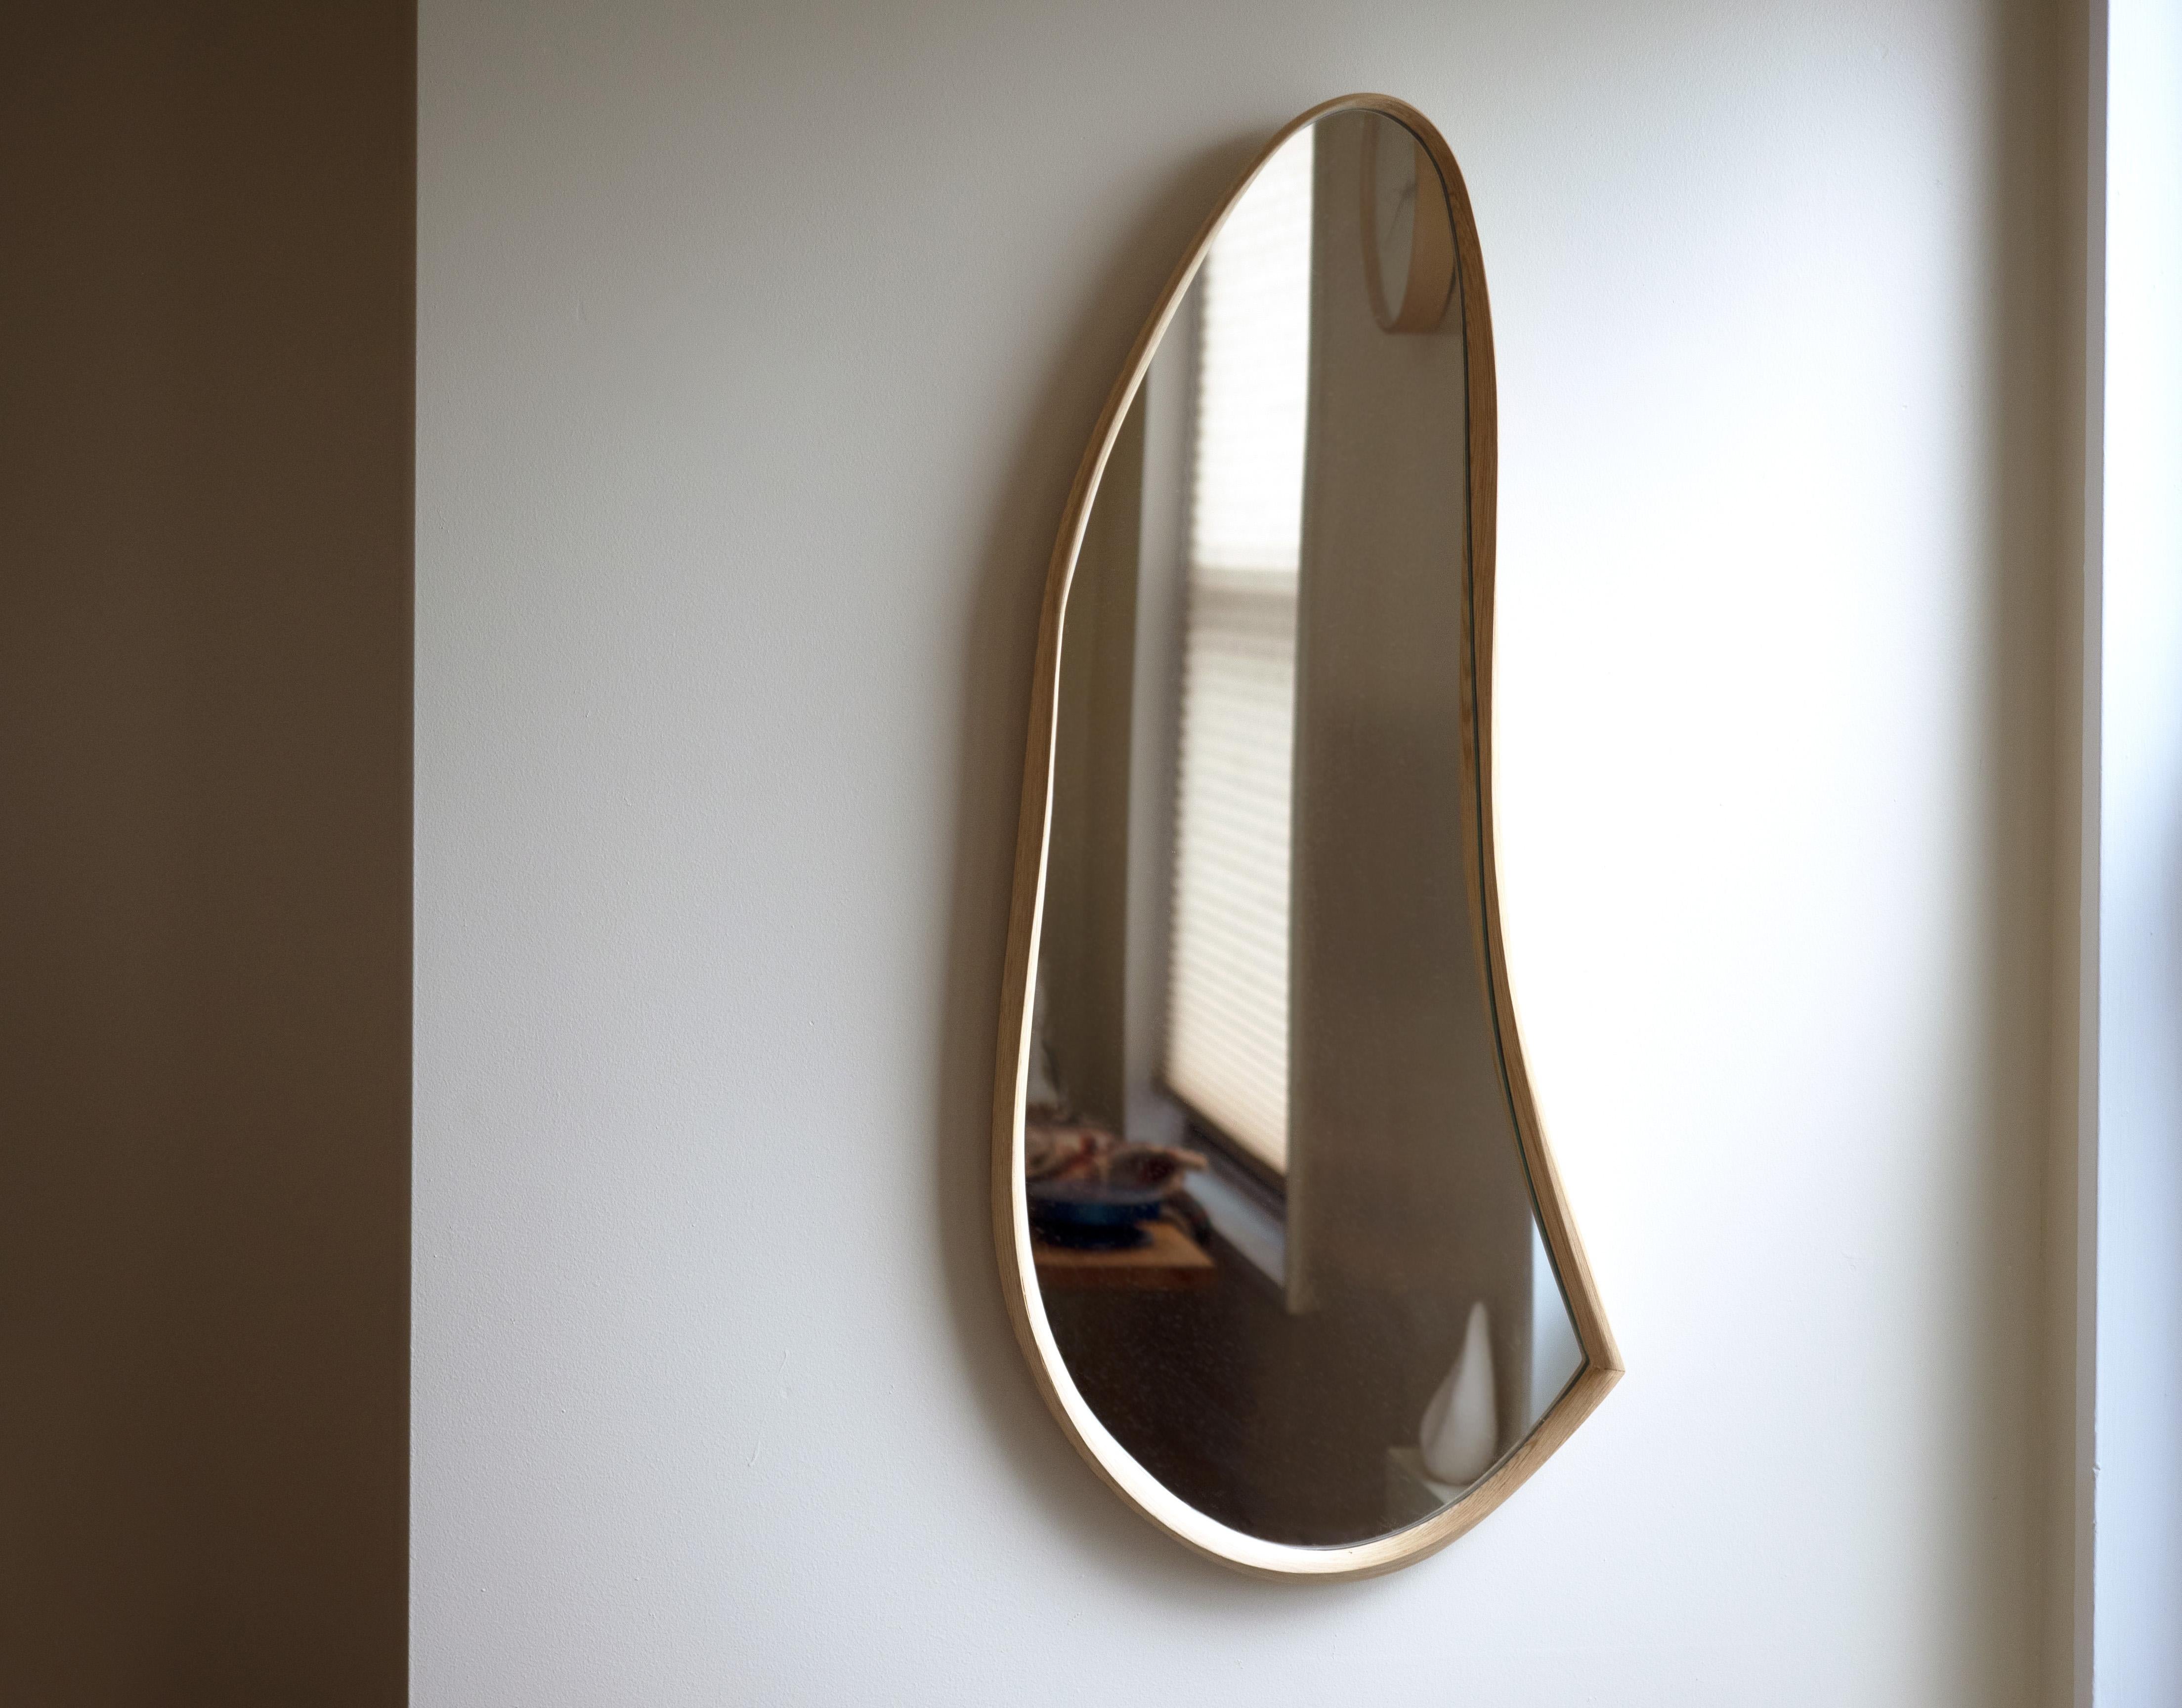 Asymmetric, Organic Wall Mirror, Bent-lamination 'Momentum Mirror' by Soo Joo  In New Condition For Sale In New York, NY